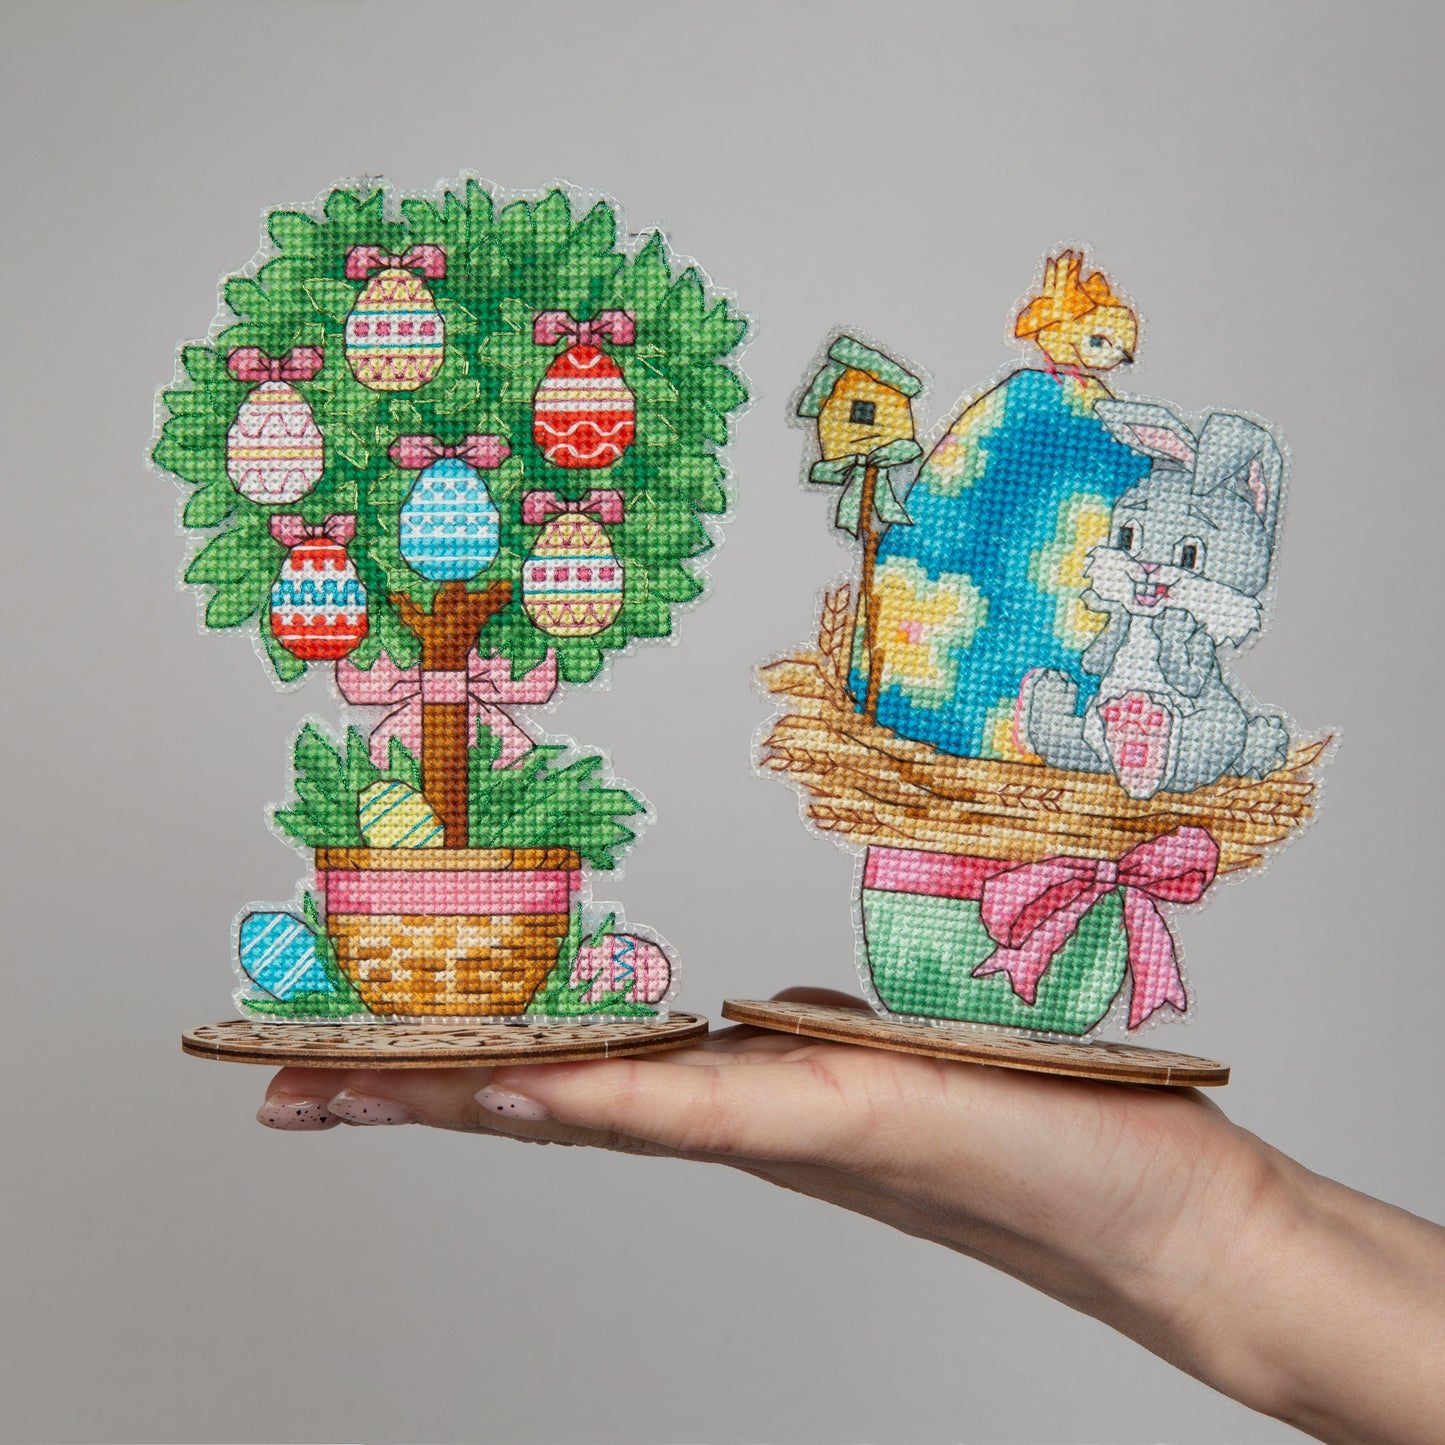 EASTER TREE "Happy Easter!", Counted Cross Stitch Kit, 14 count plastic canvas, size 10,5 x 14 cm, CRYSTAL ART (T-63)